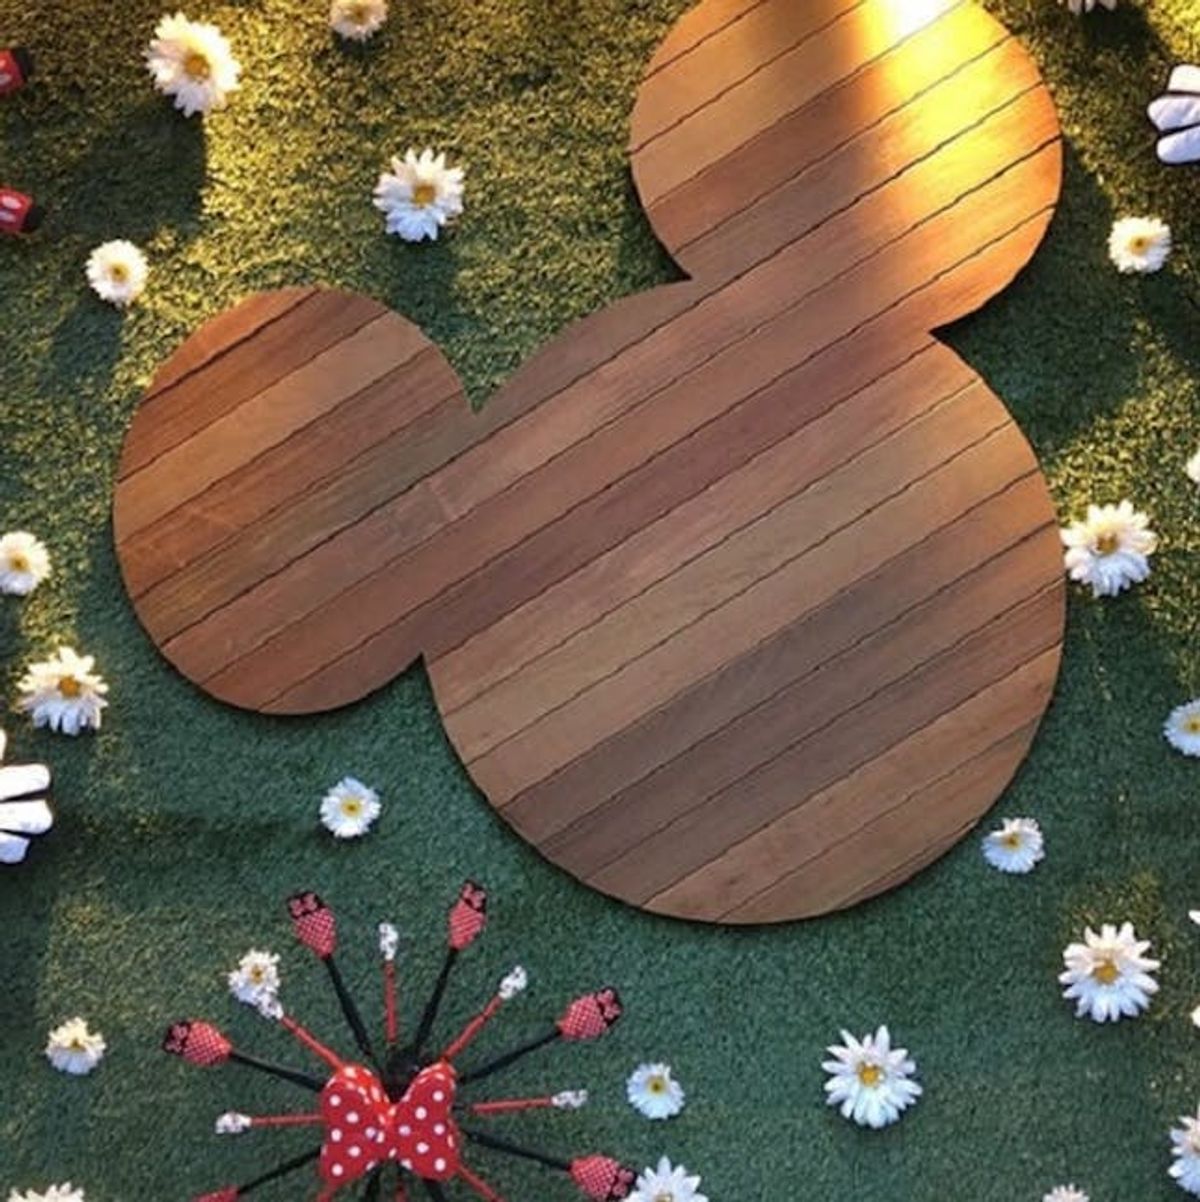 Here’s Your First Look at Disney’s New Home Store!